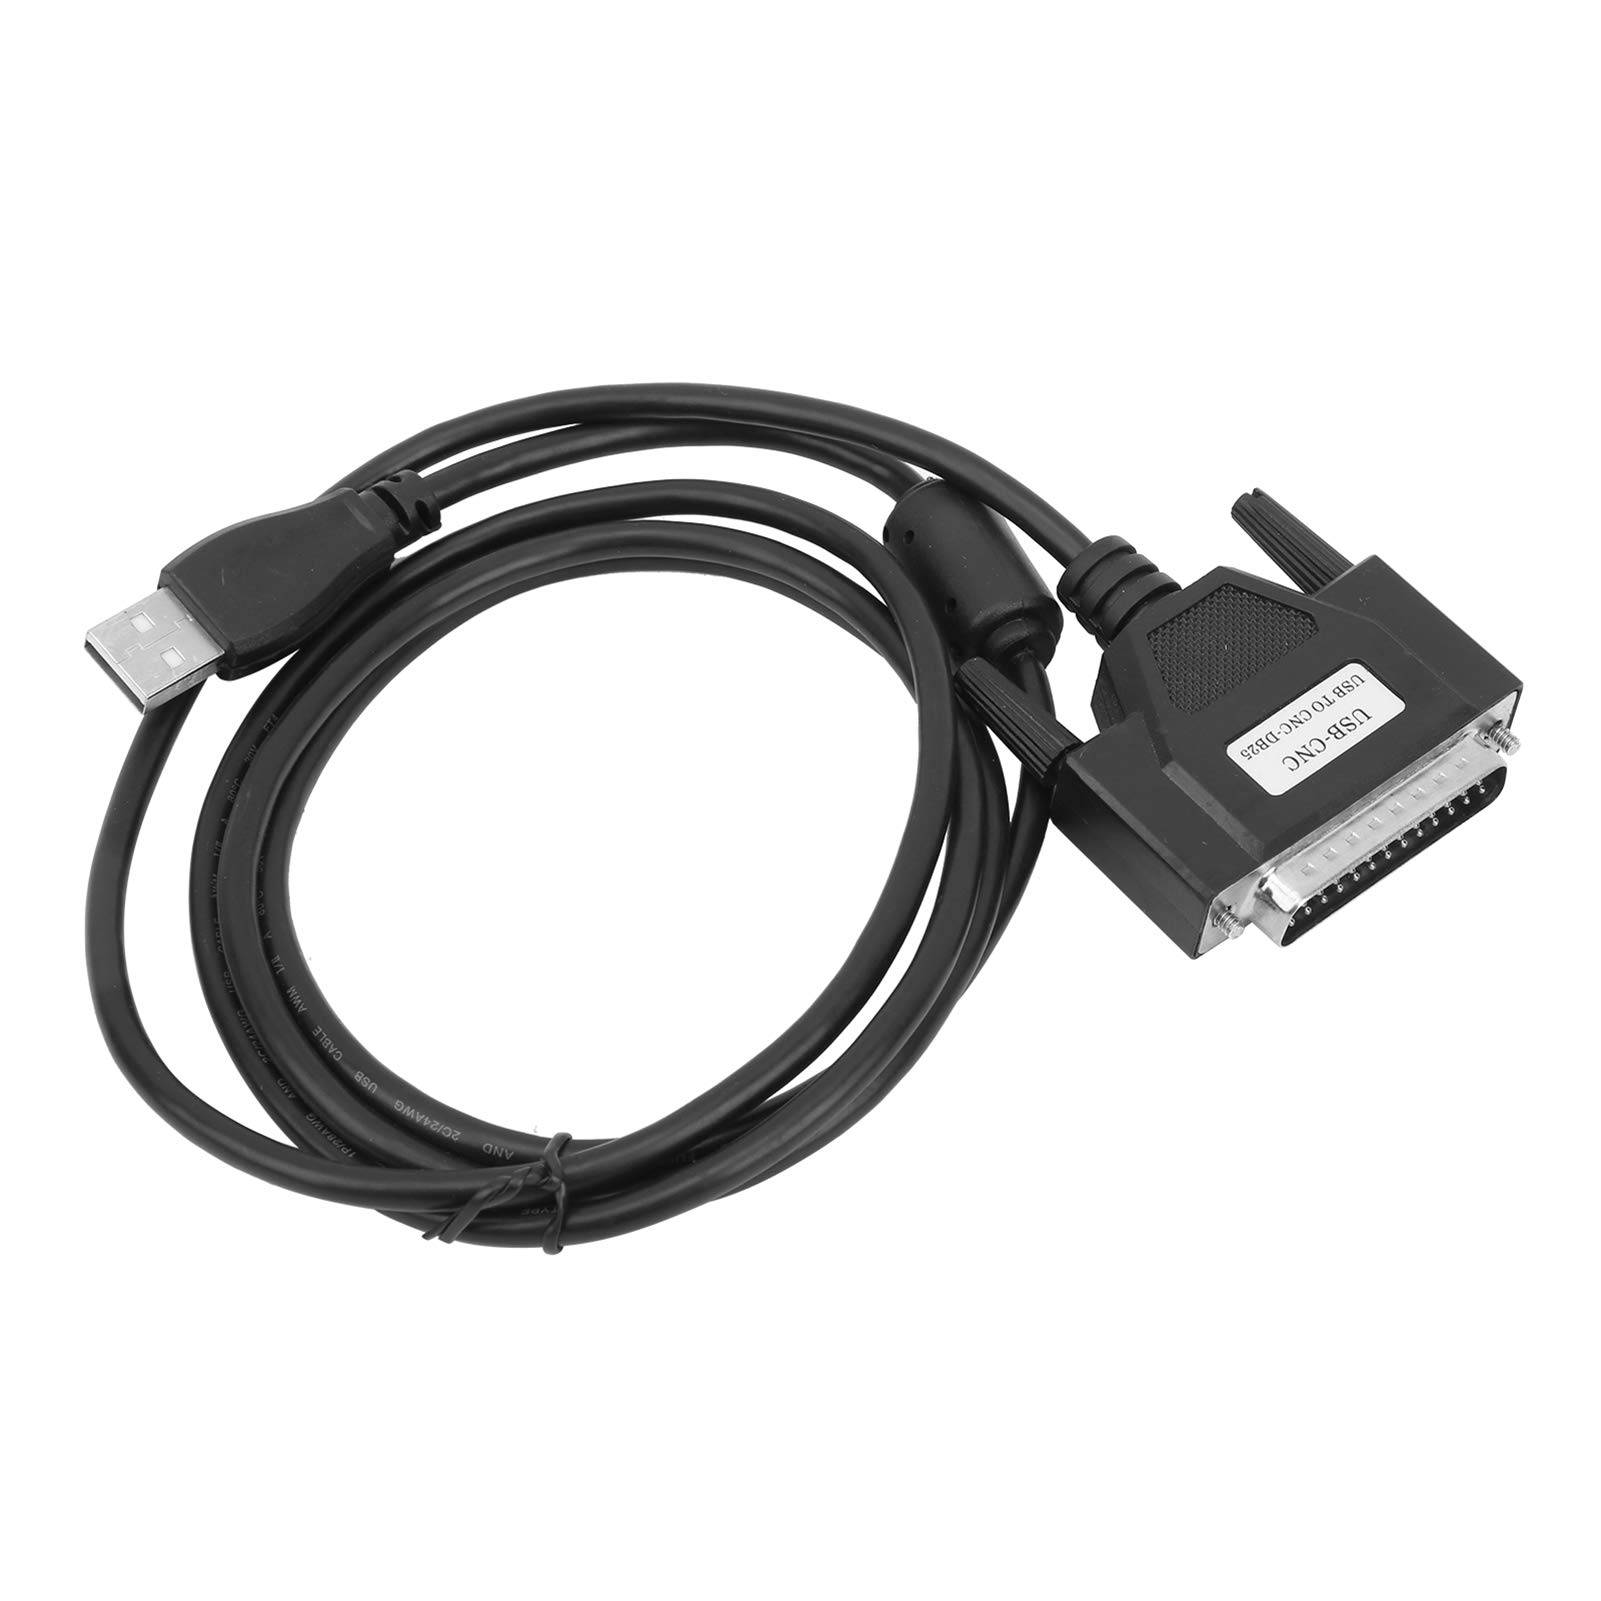 USB cable and computer connection